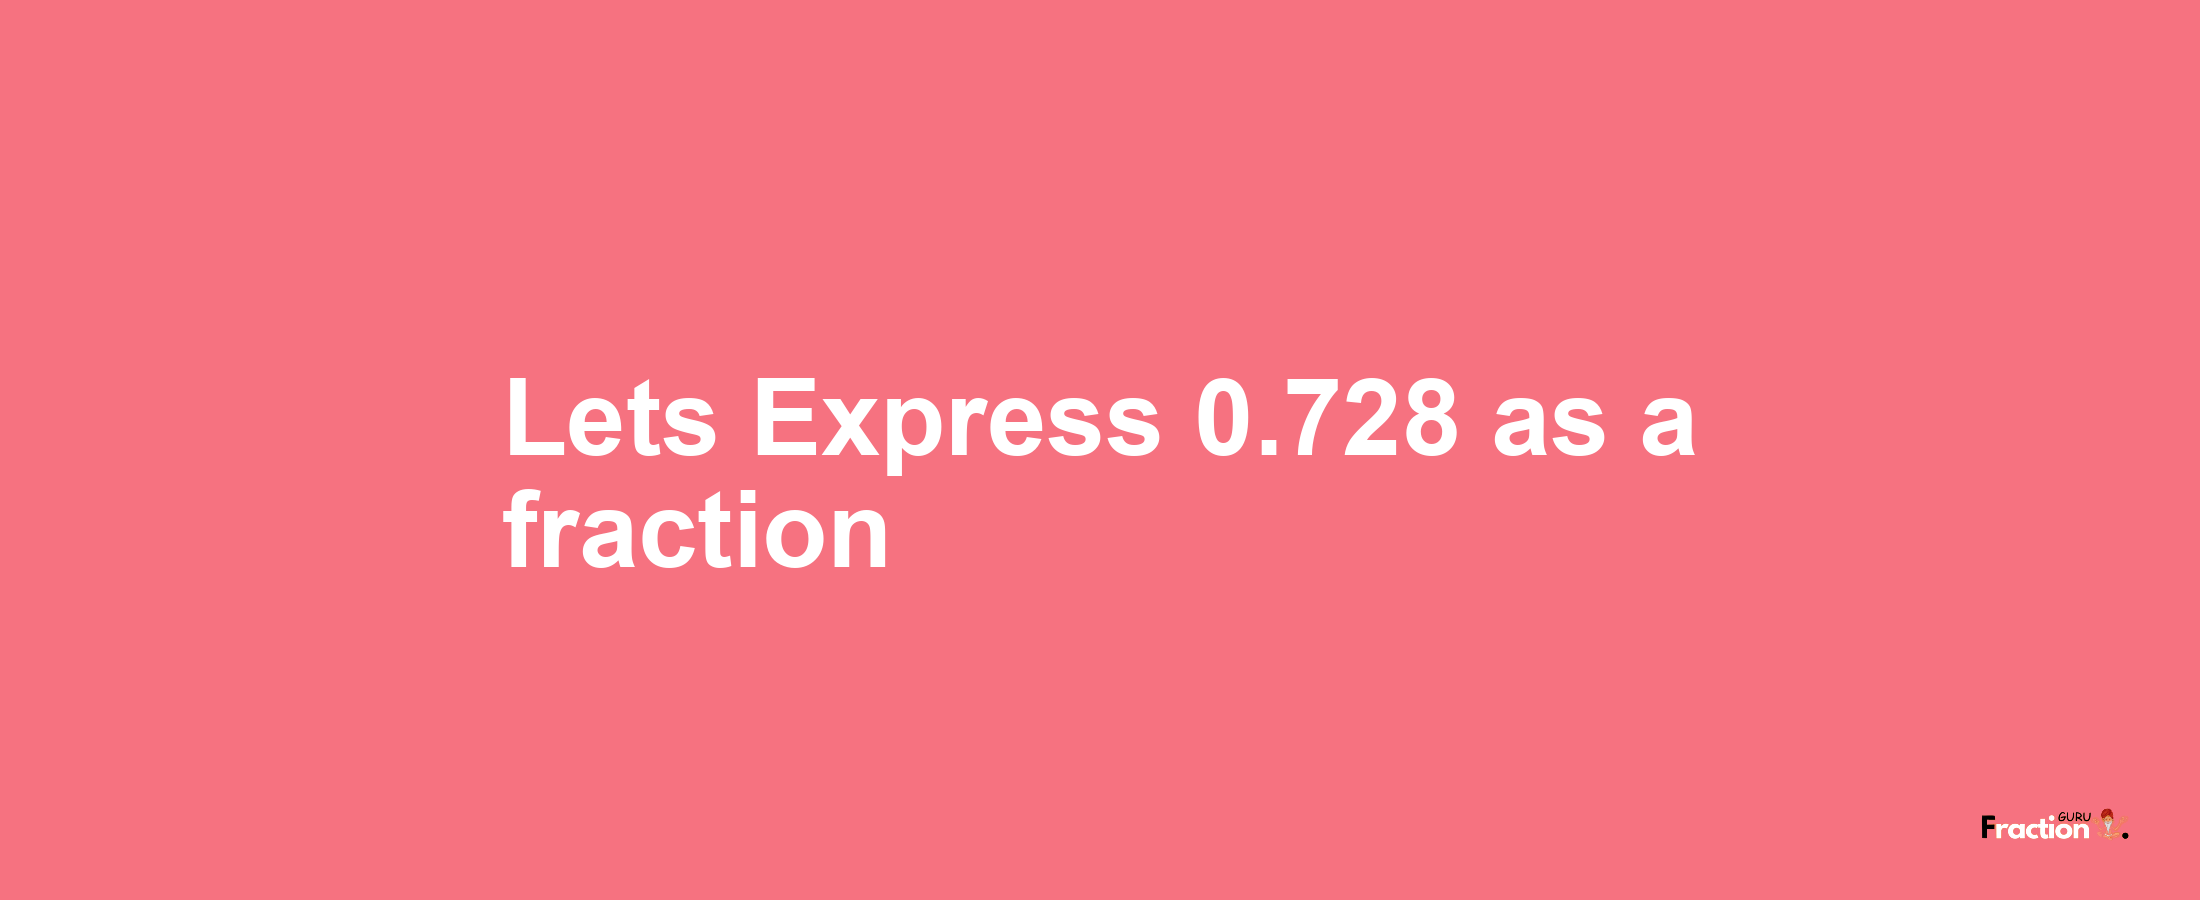 Lets Express 0.728 as afraction